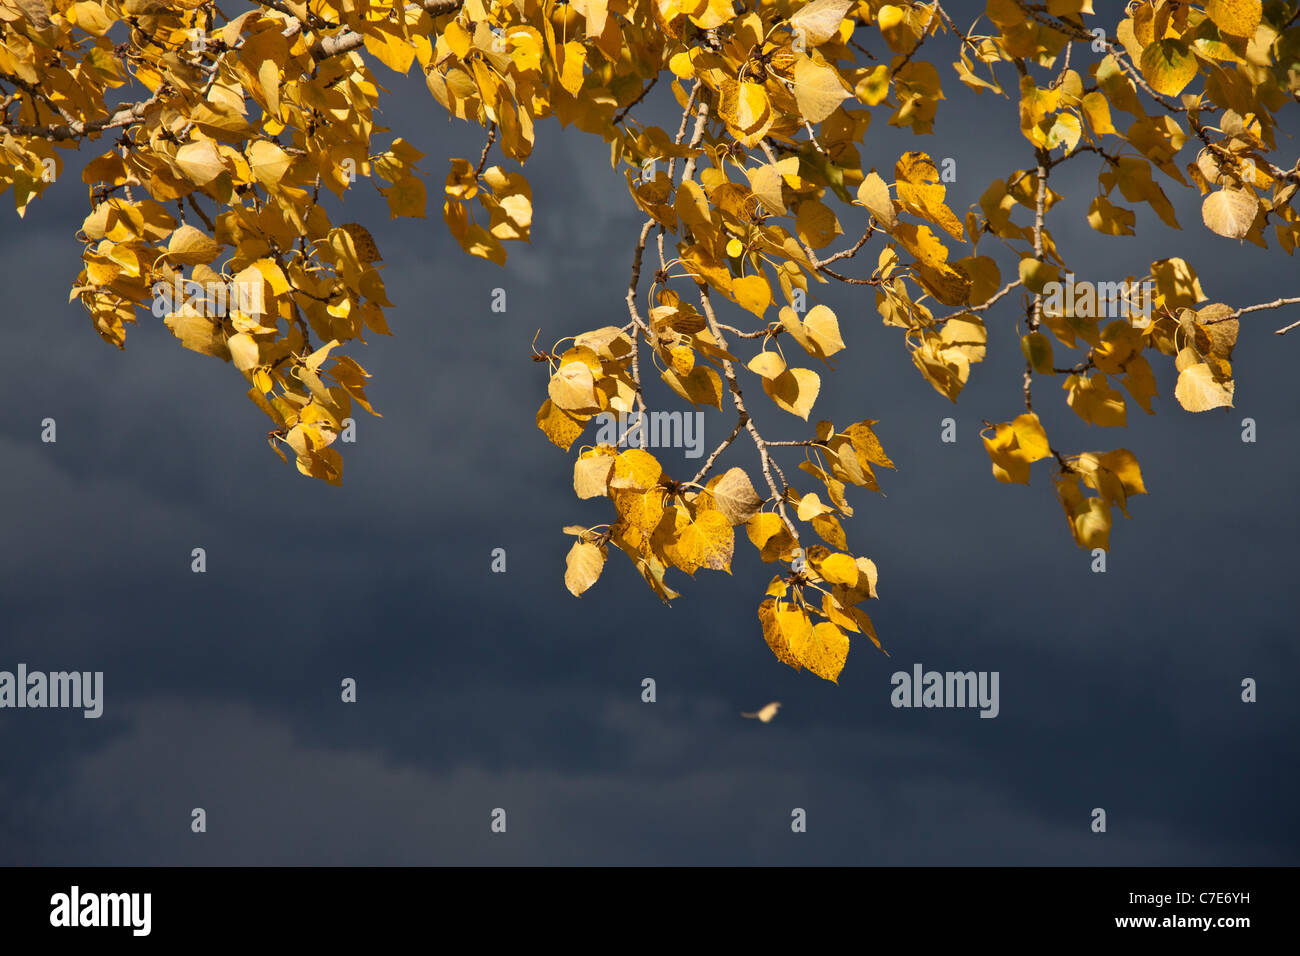 Autumn leaves on stormy sky background Stock Photo